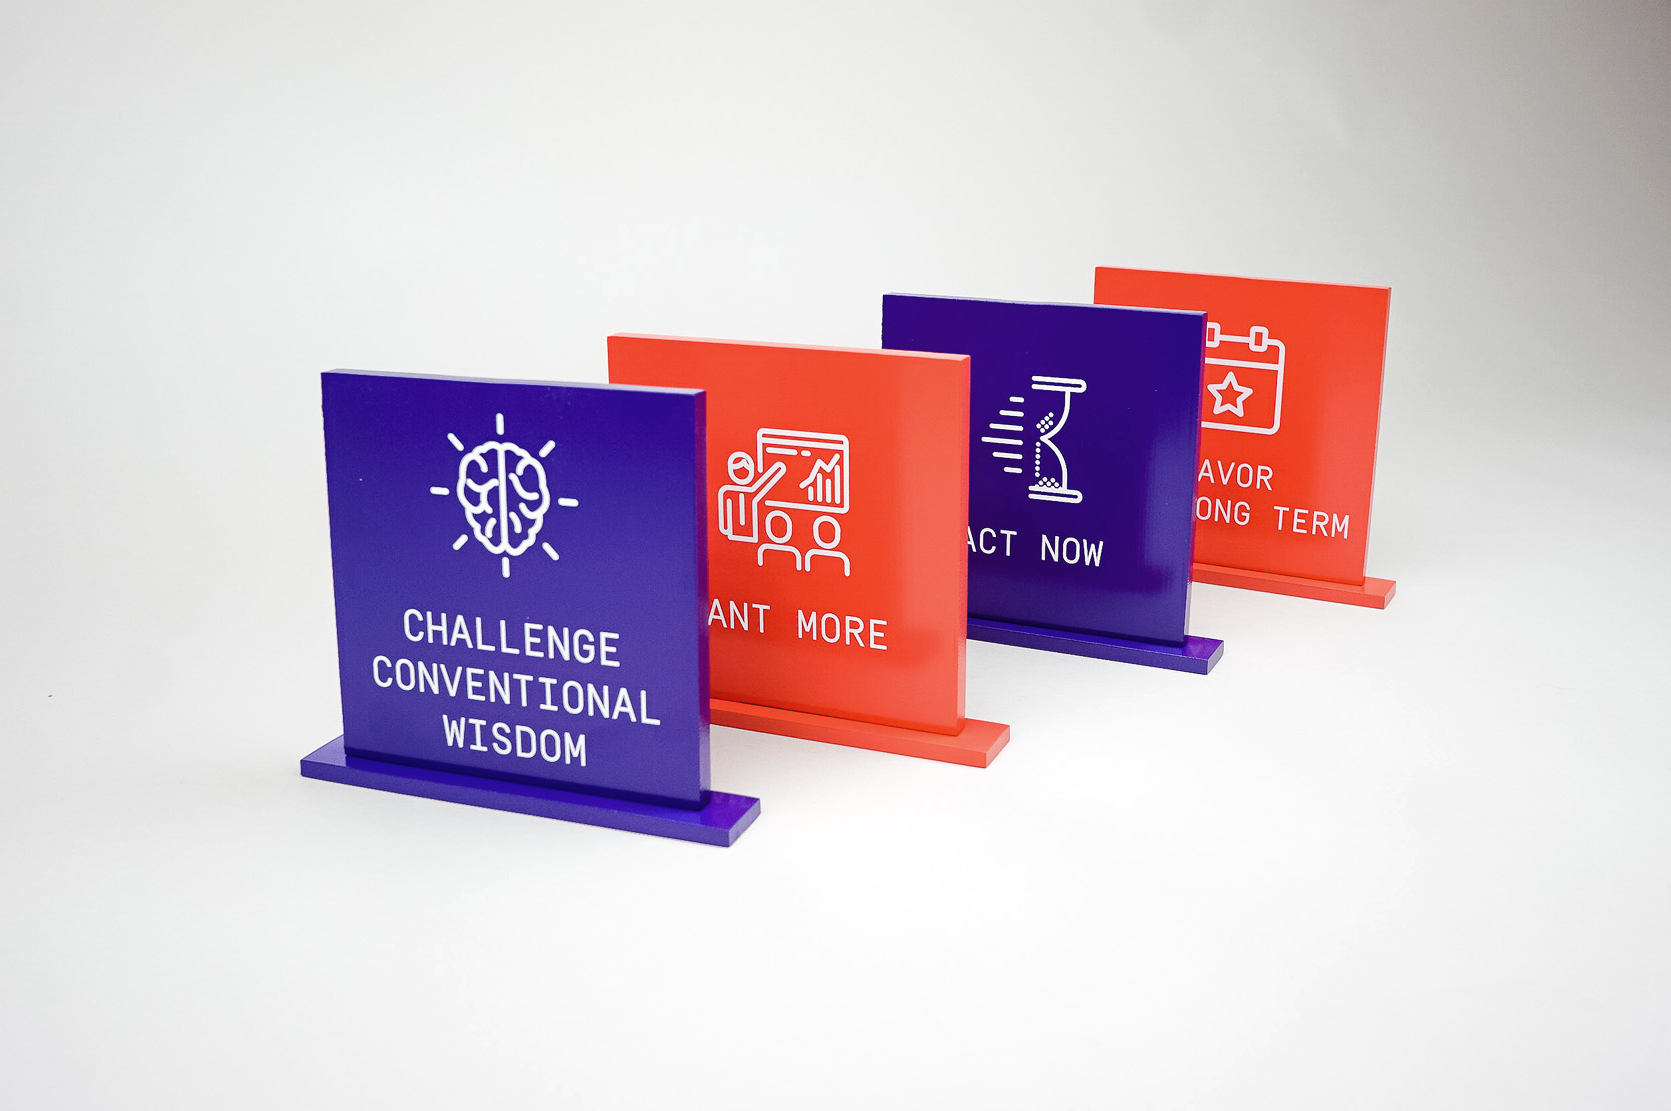 Red and purple painted tabletop company value plaques for the San Francisco office of Gong, makers of a conversation intelligence platform for sales.